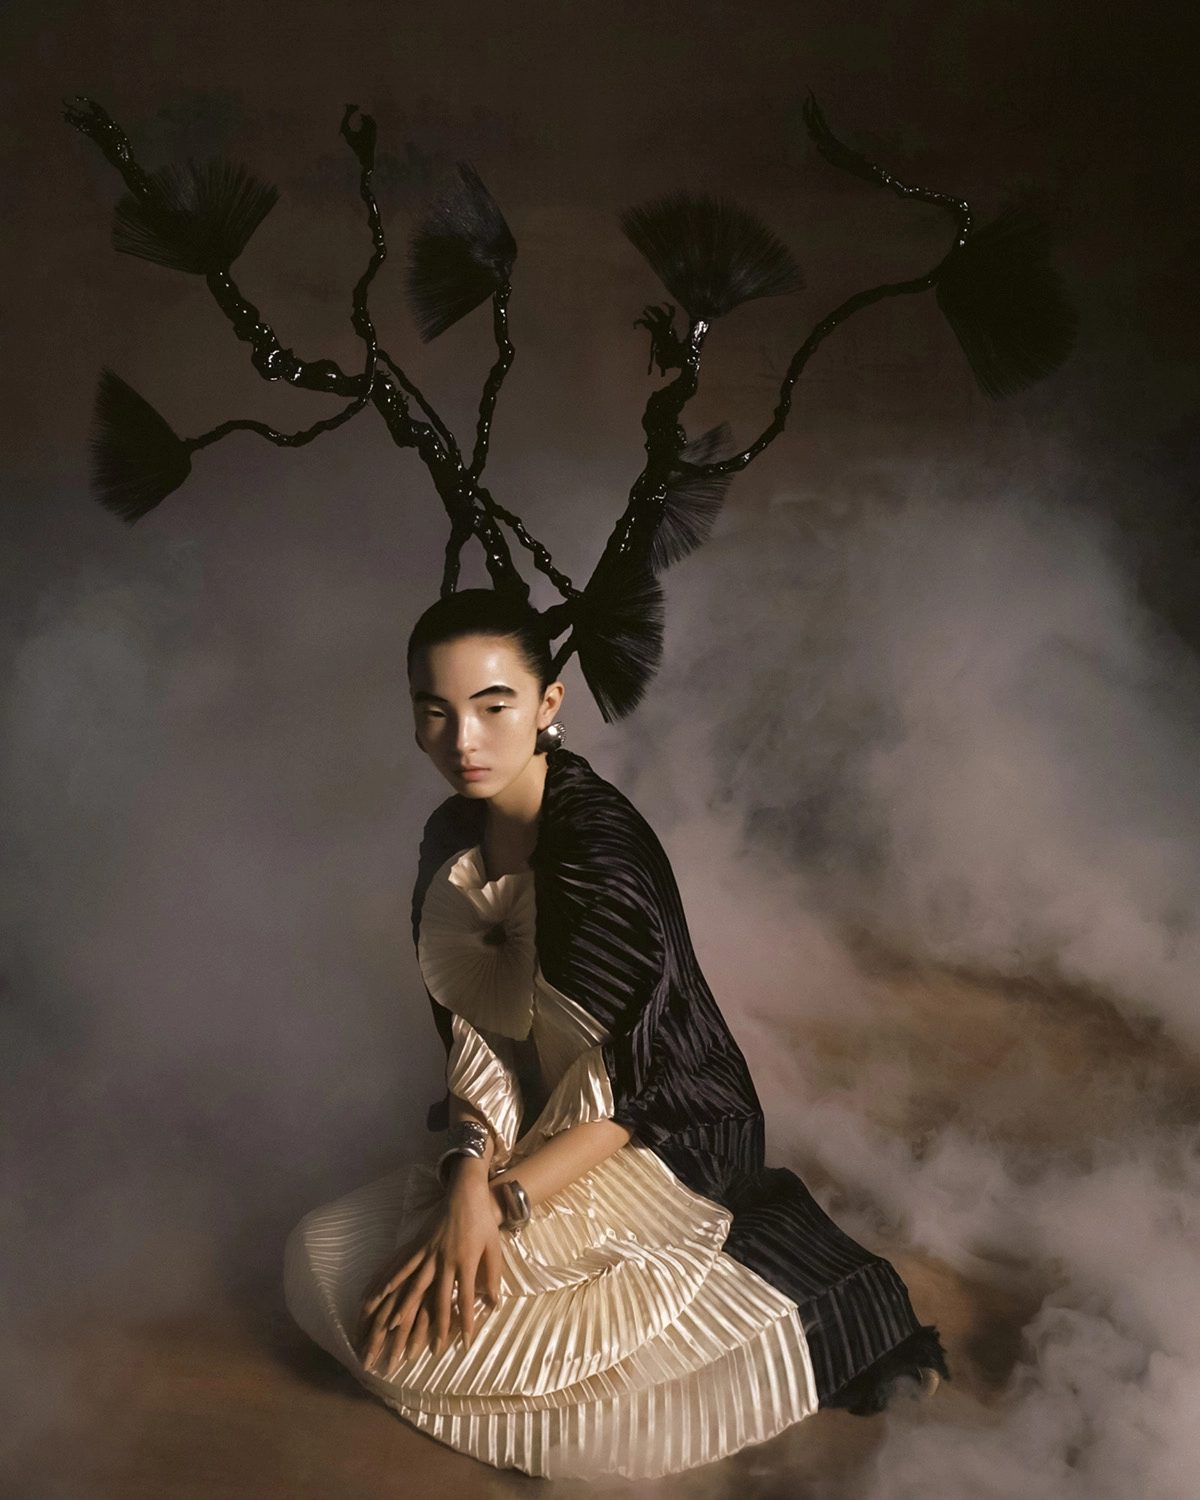 Xiao Wen Ju covers Vogue China August 2022 by Leslie Zhang